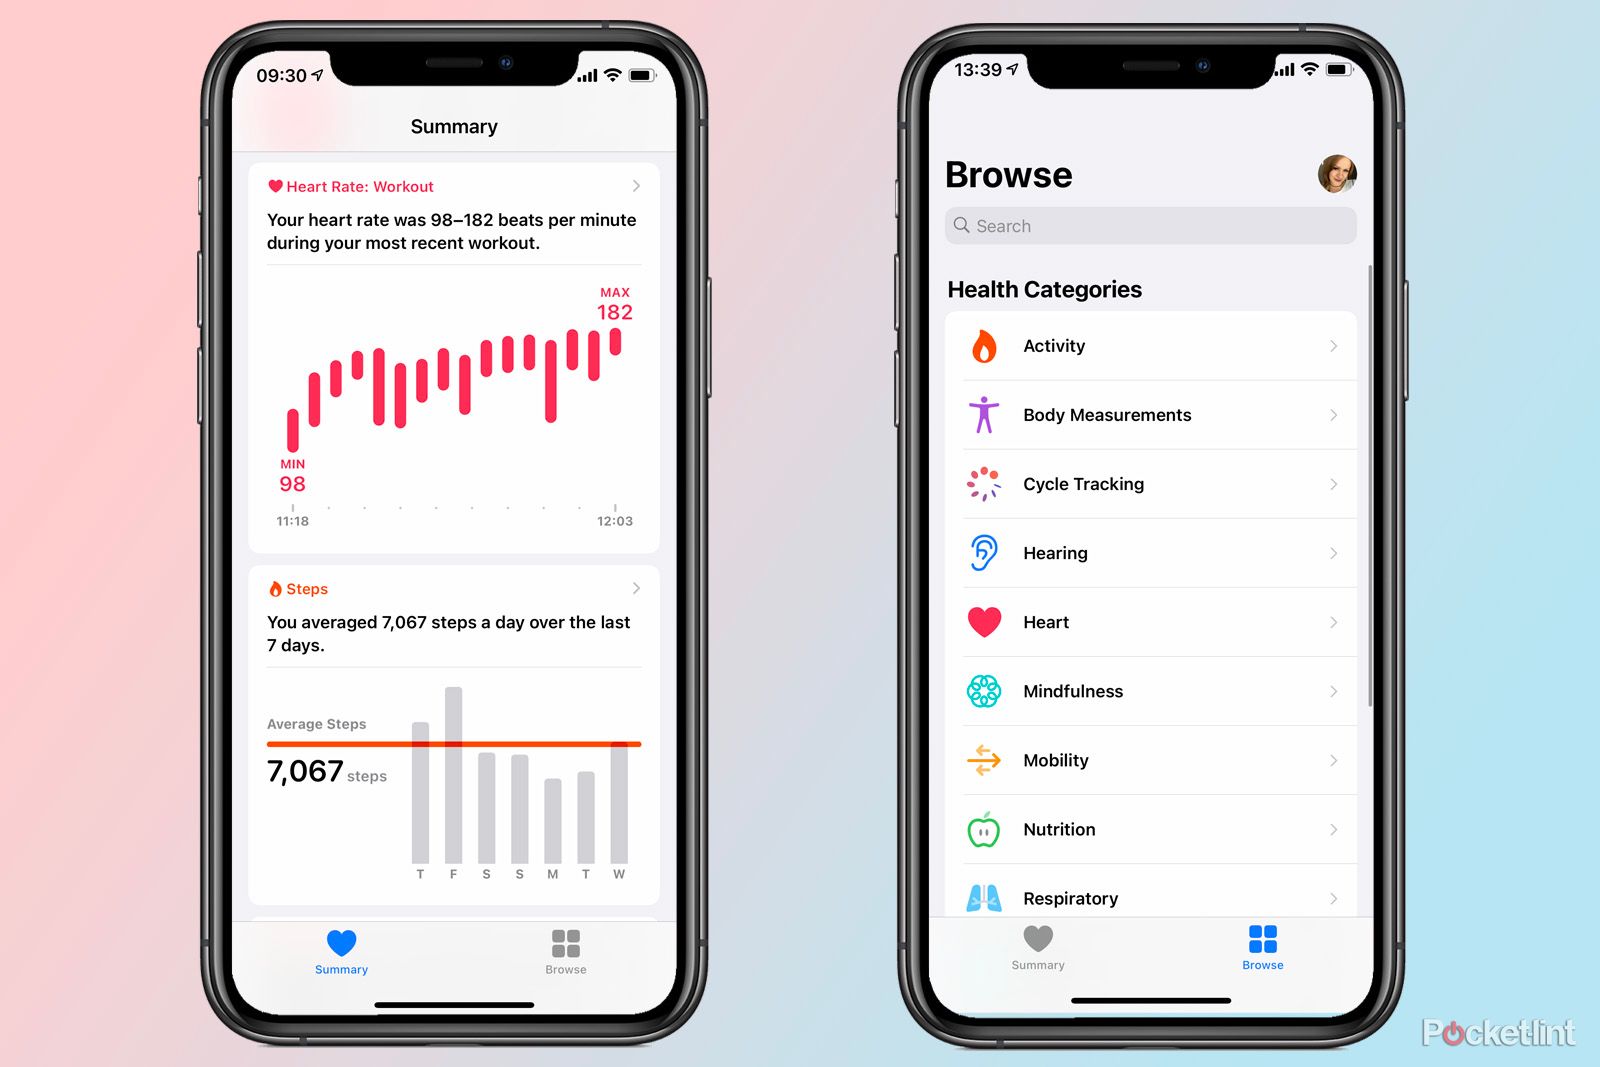 Apple Health App: What Is It And How Does It Work?